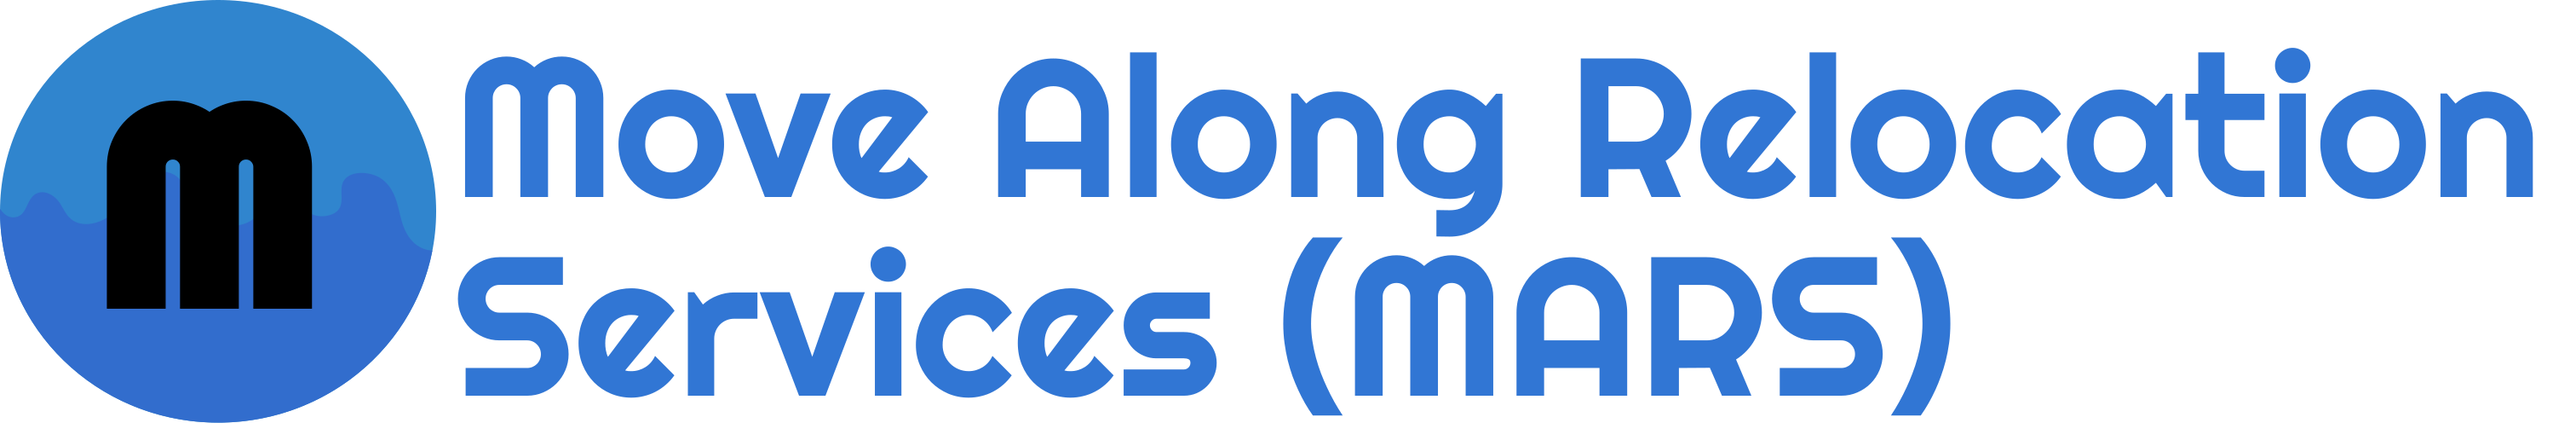 Move Along Relocation Services (MARS)'s Logo